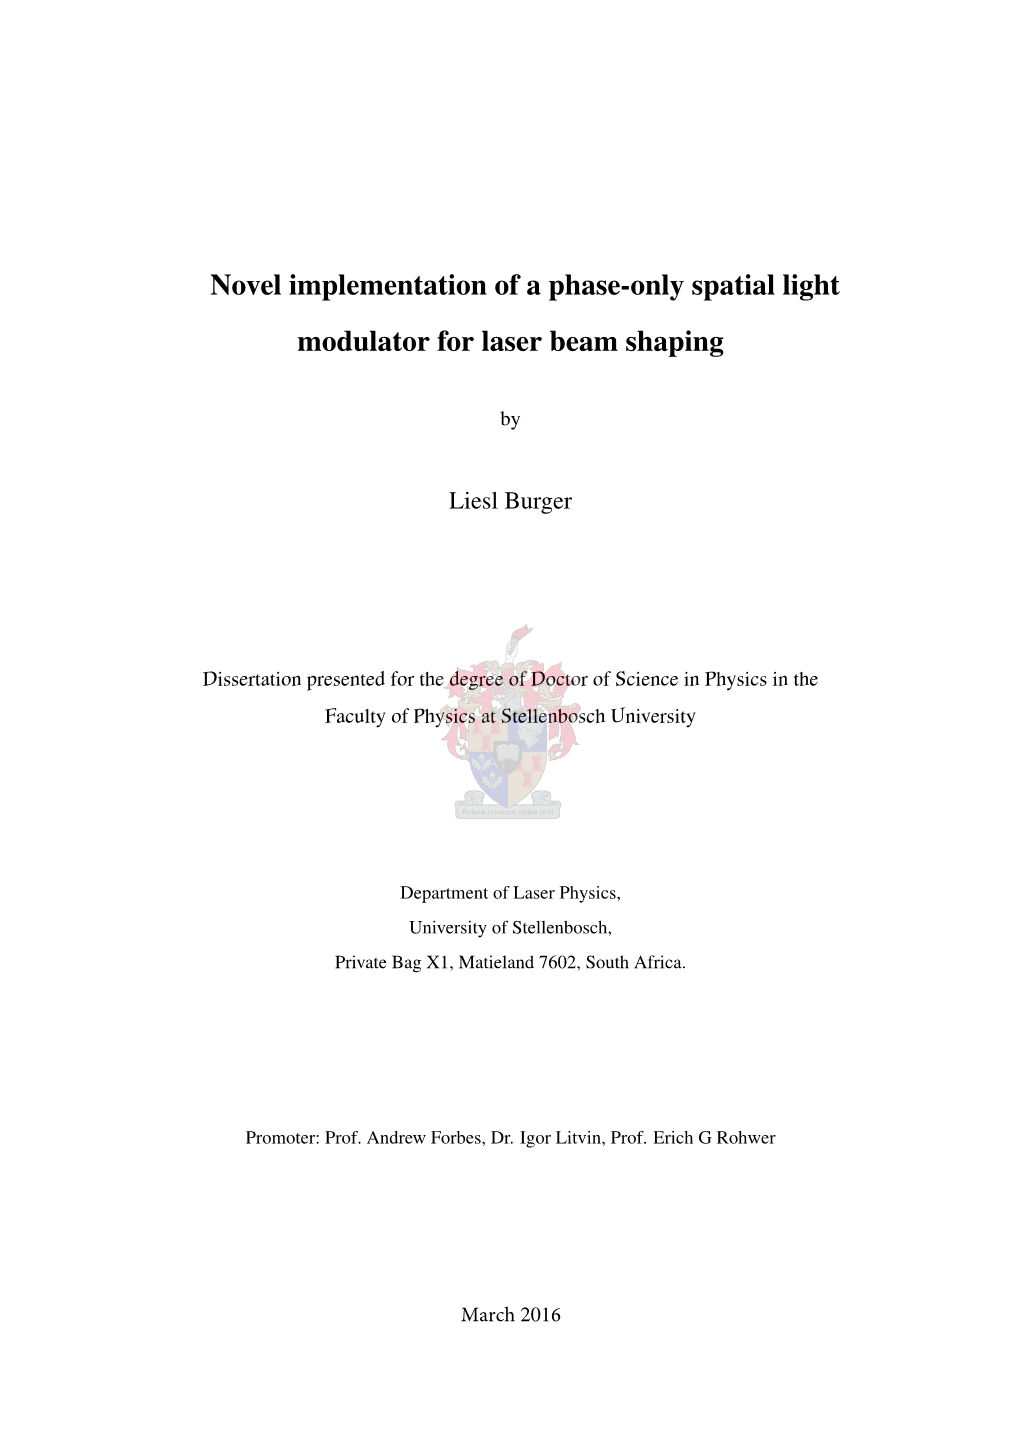 Novel Implementation of a Phase-Only Spatial Light Modulator for Laser Beam Shaping